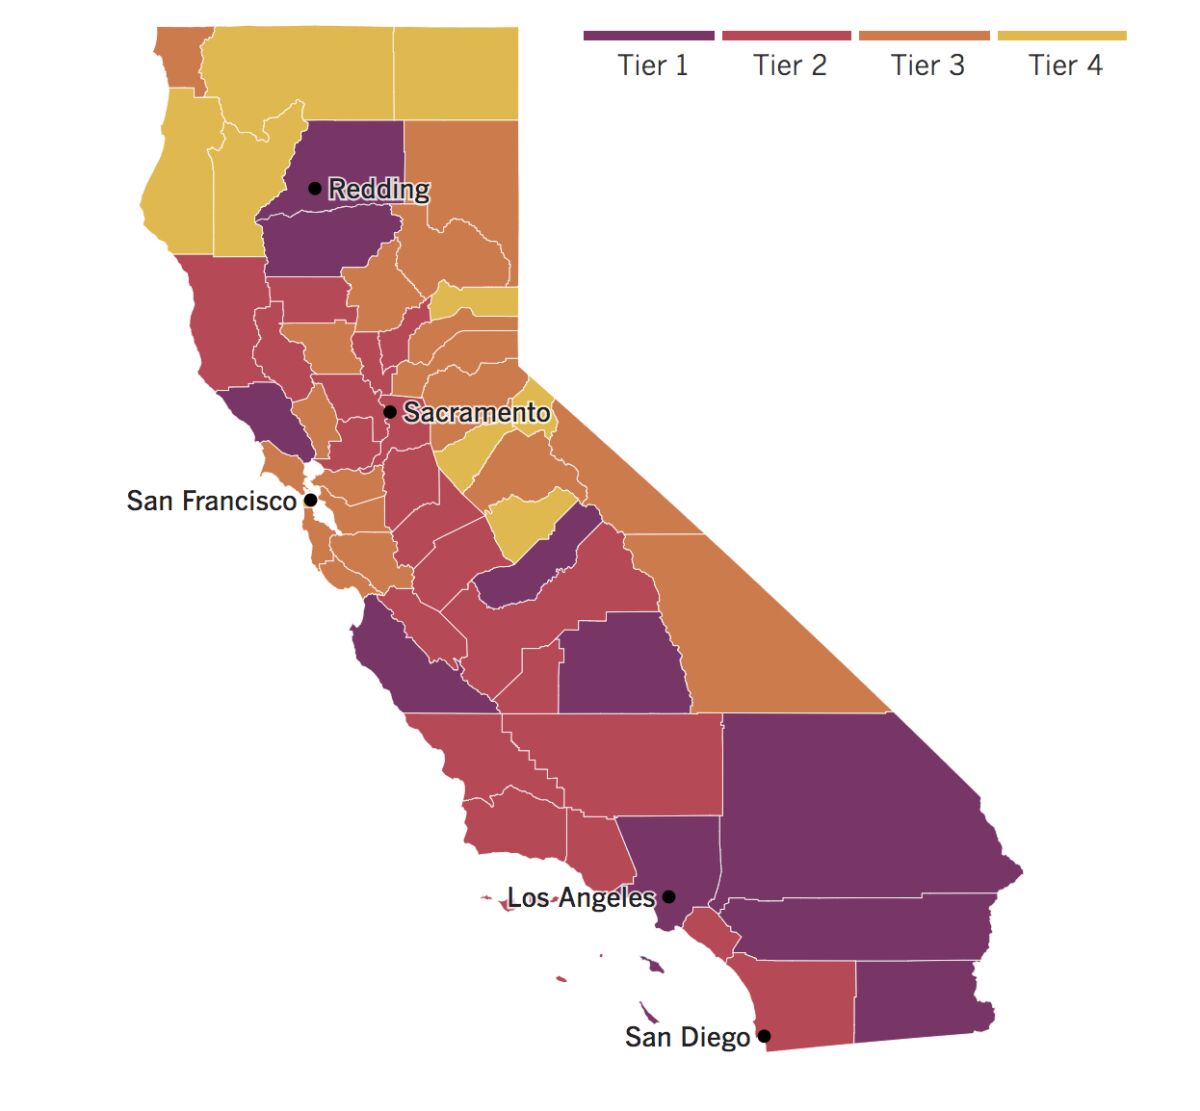 A map showing the tiers to which California counties have been assigned for reopening based on local coronavirus risk.